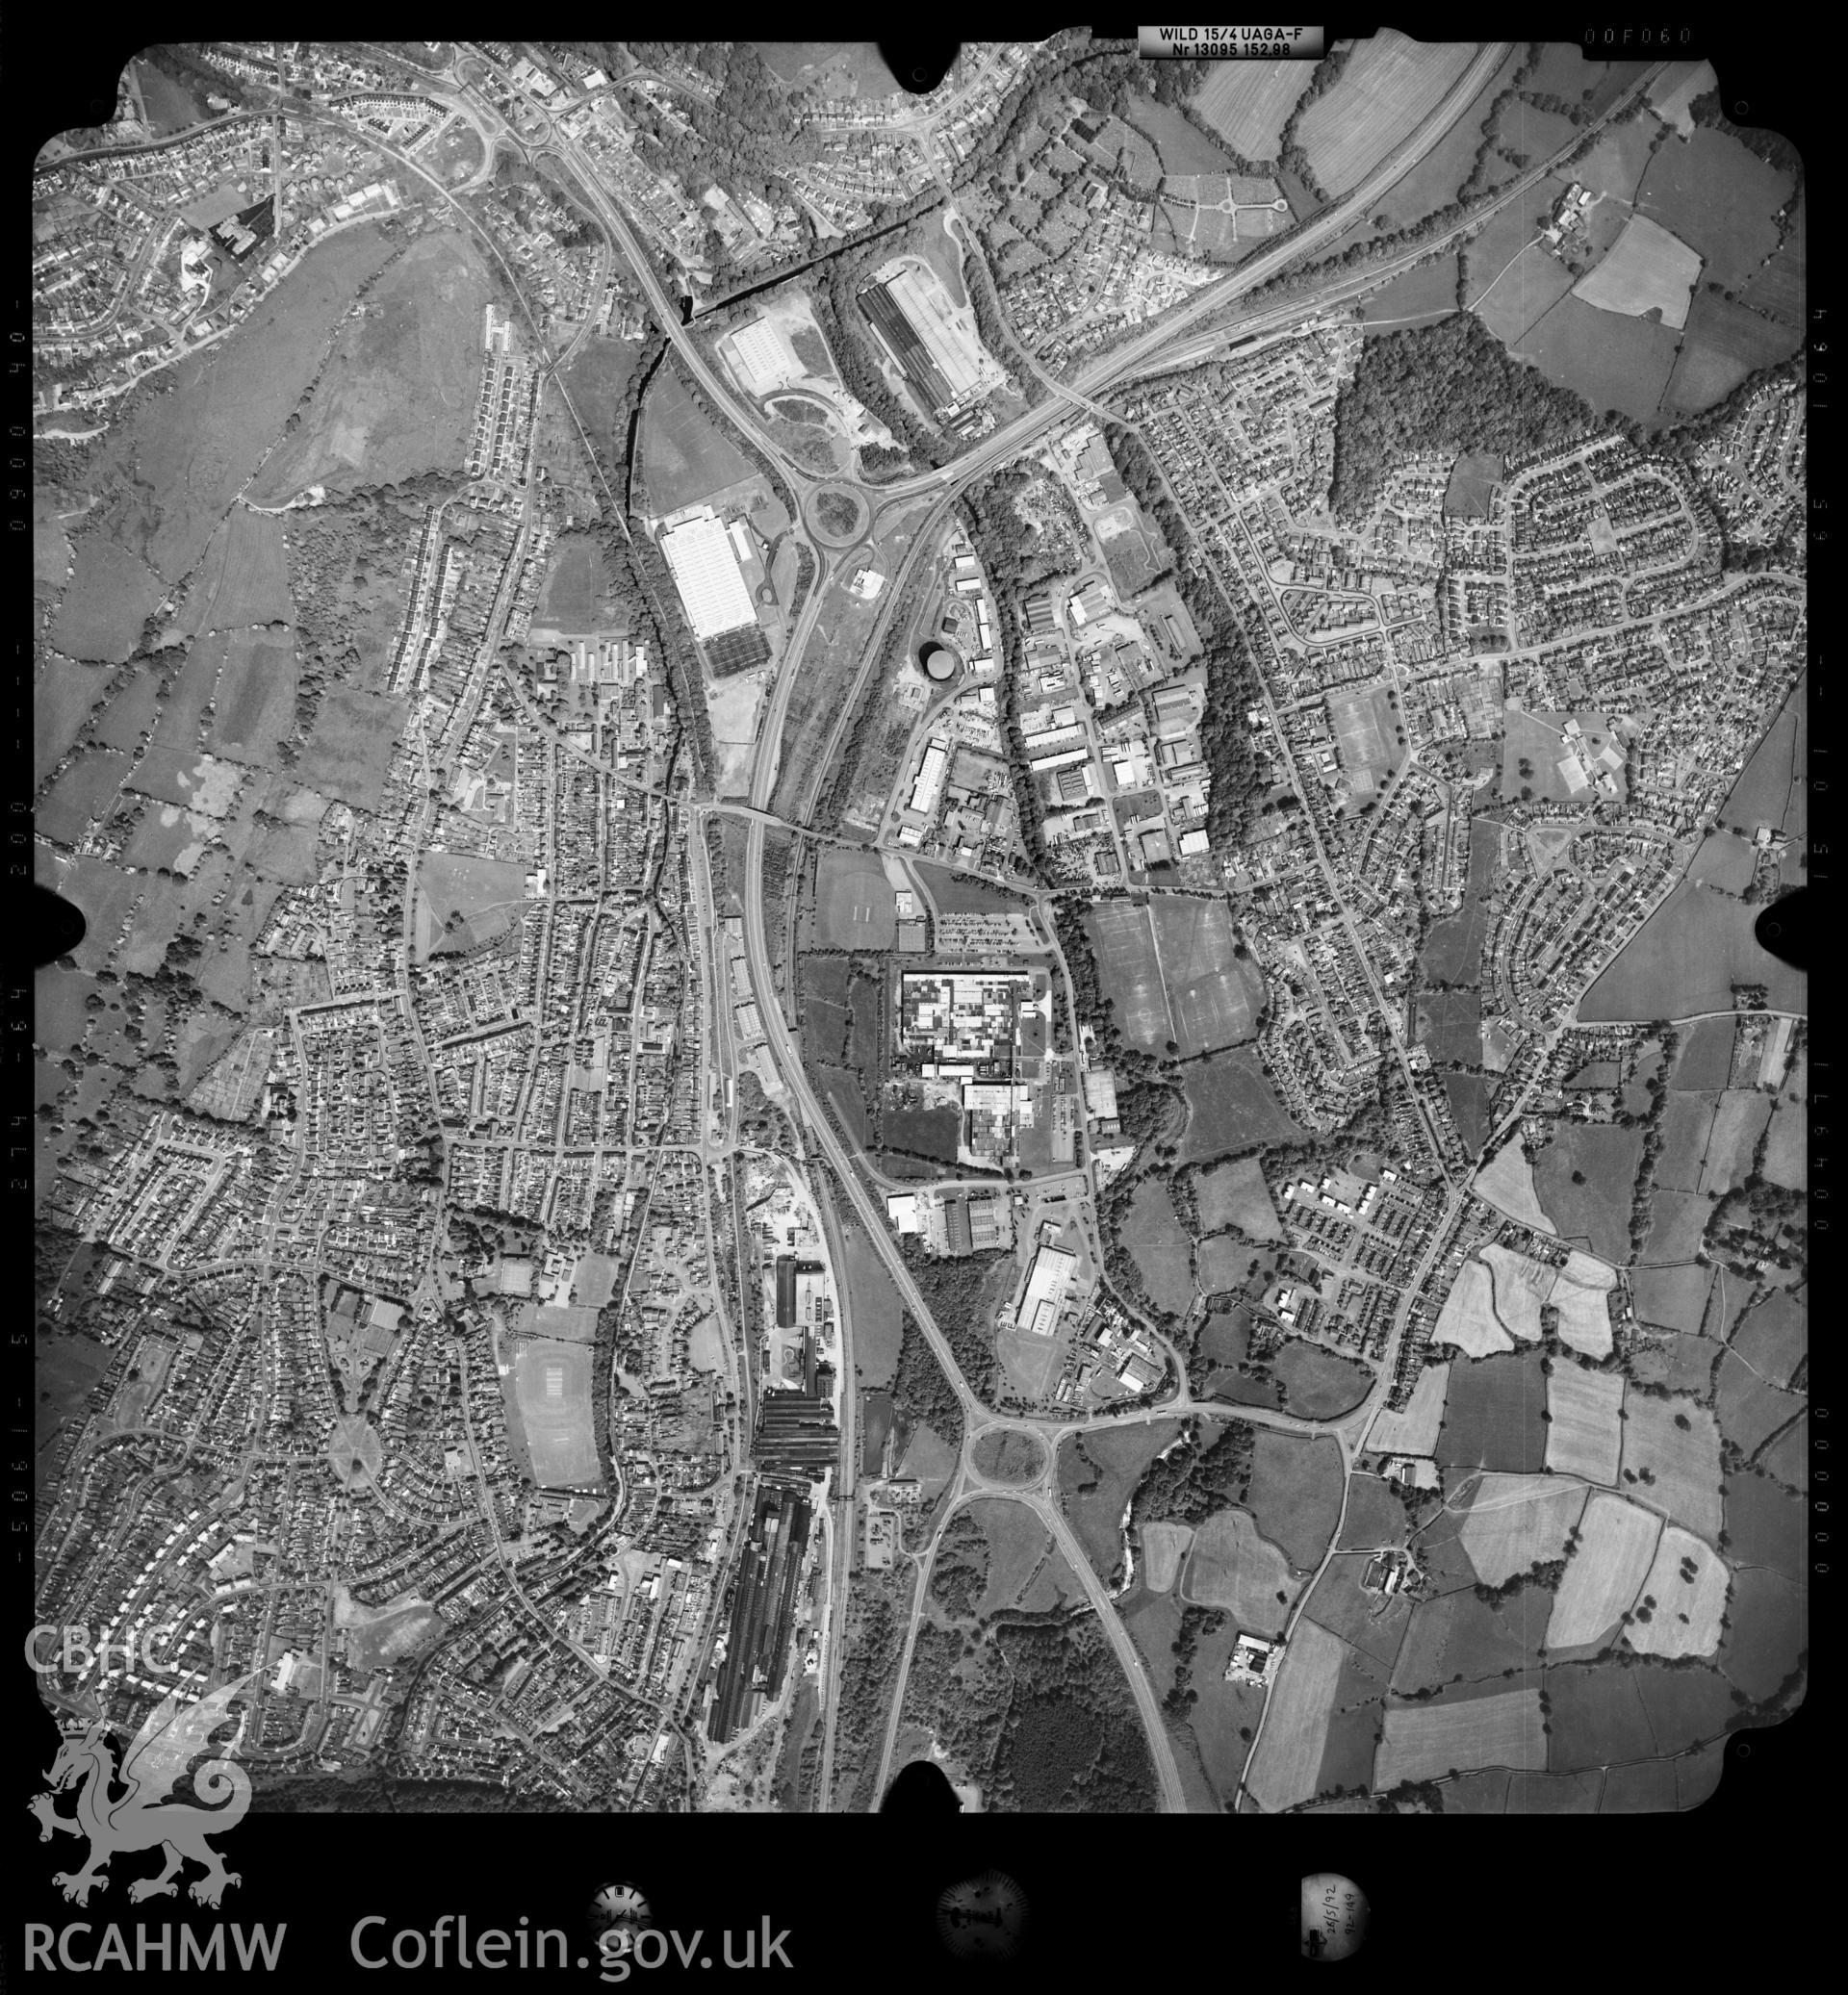 Digitized copy of an aerial photograph showing the Pontypool area, taken by Ordnance Survey, 1992.